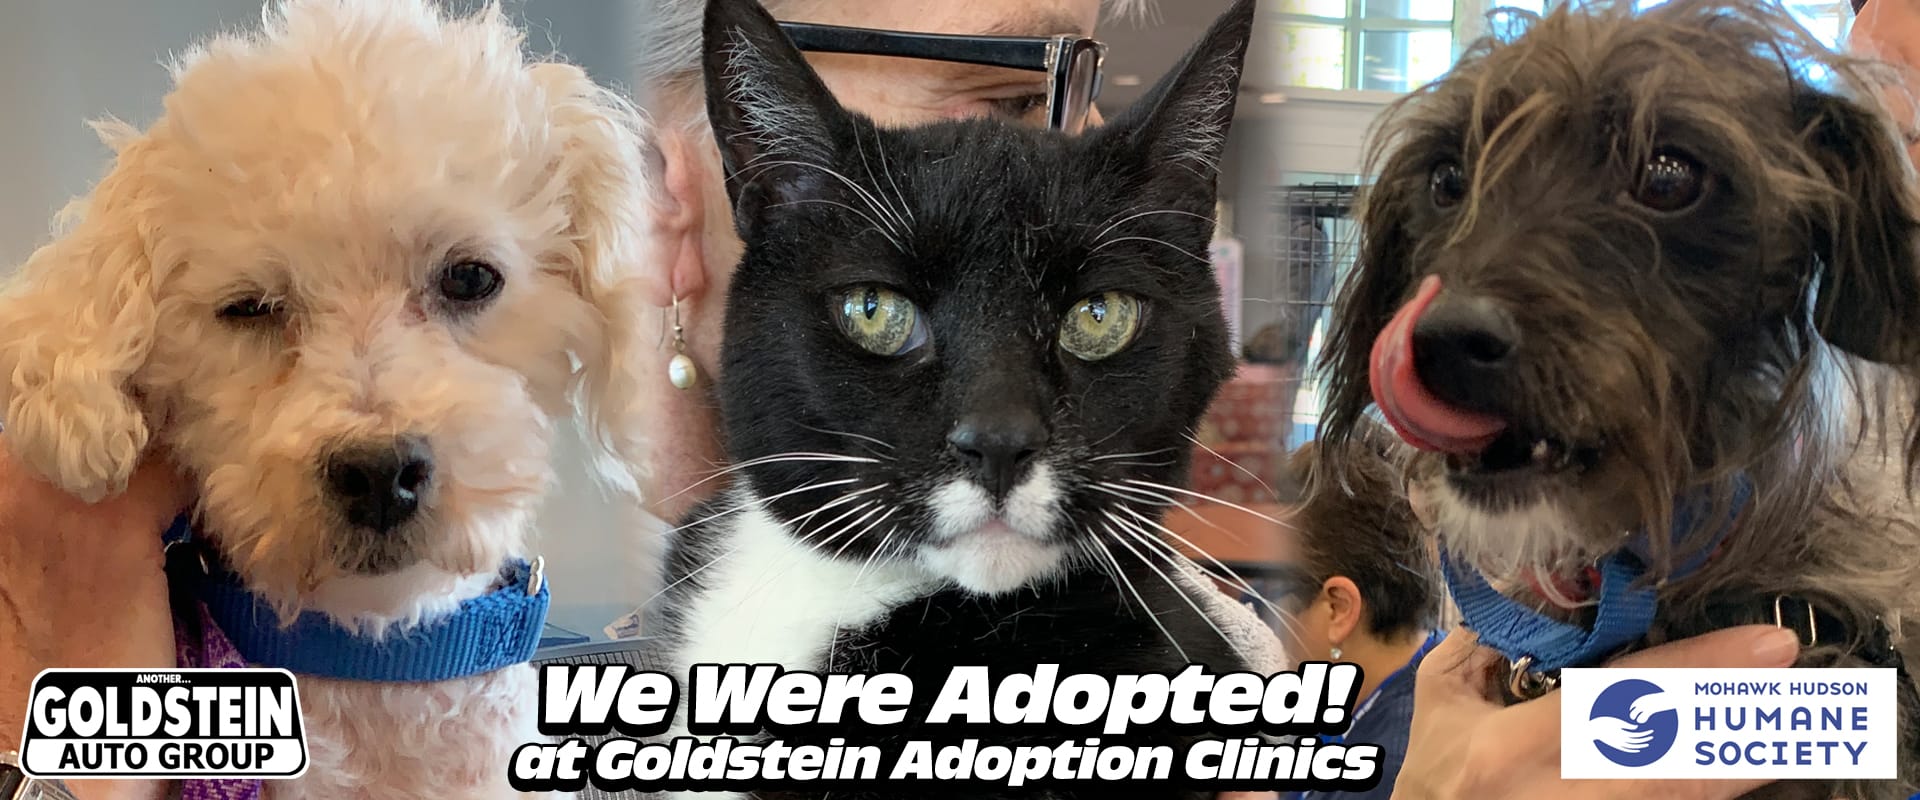 Goldstein Auto Group and Mohawk Hudson Humane Society pet adoptions